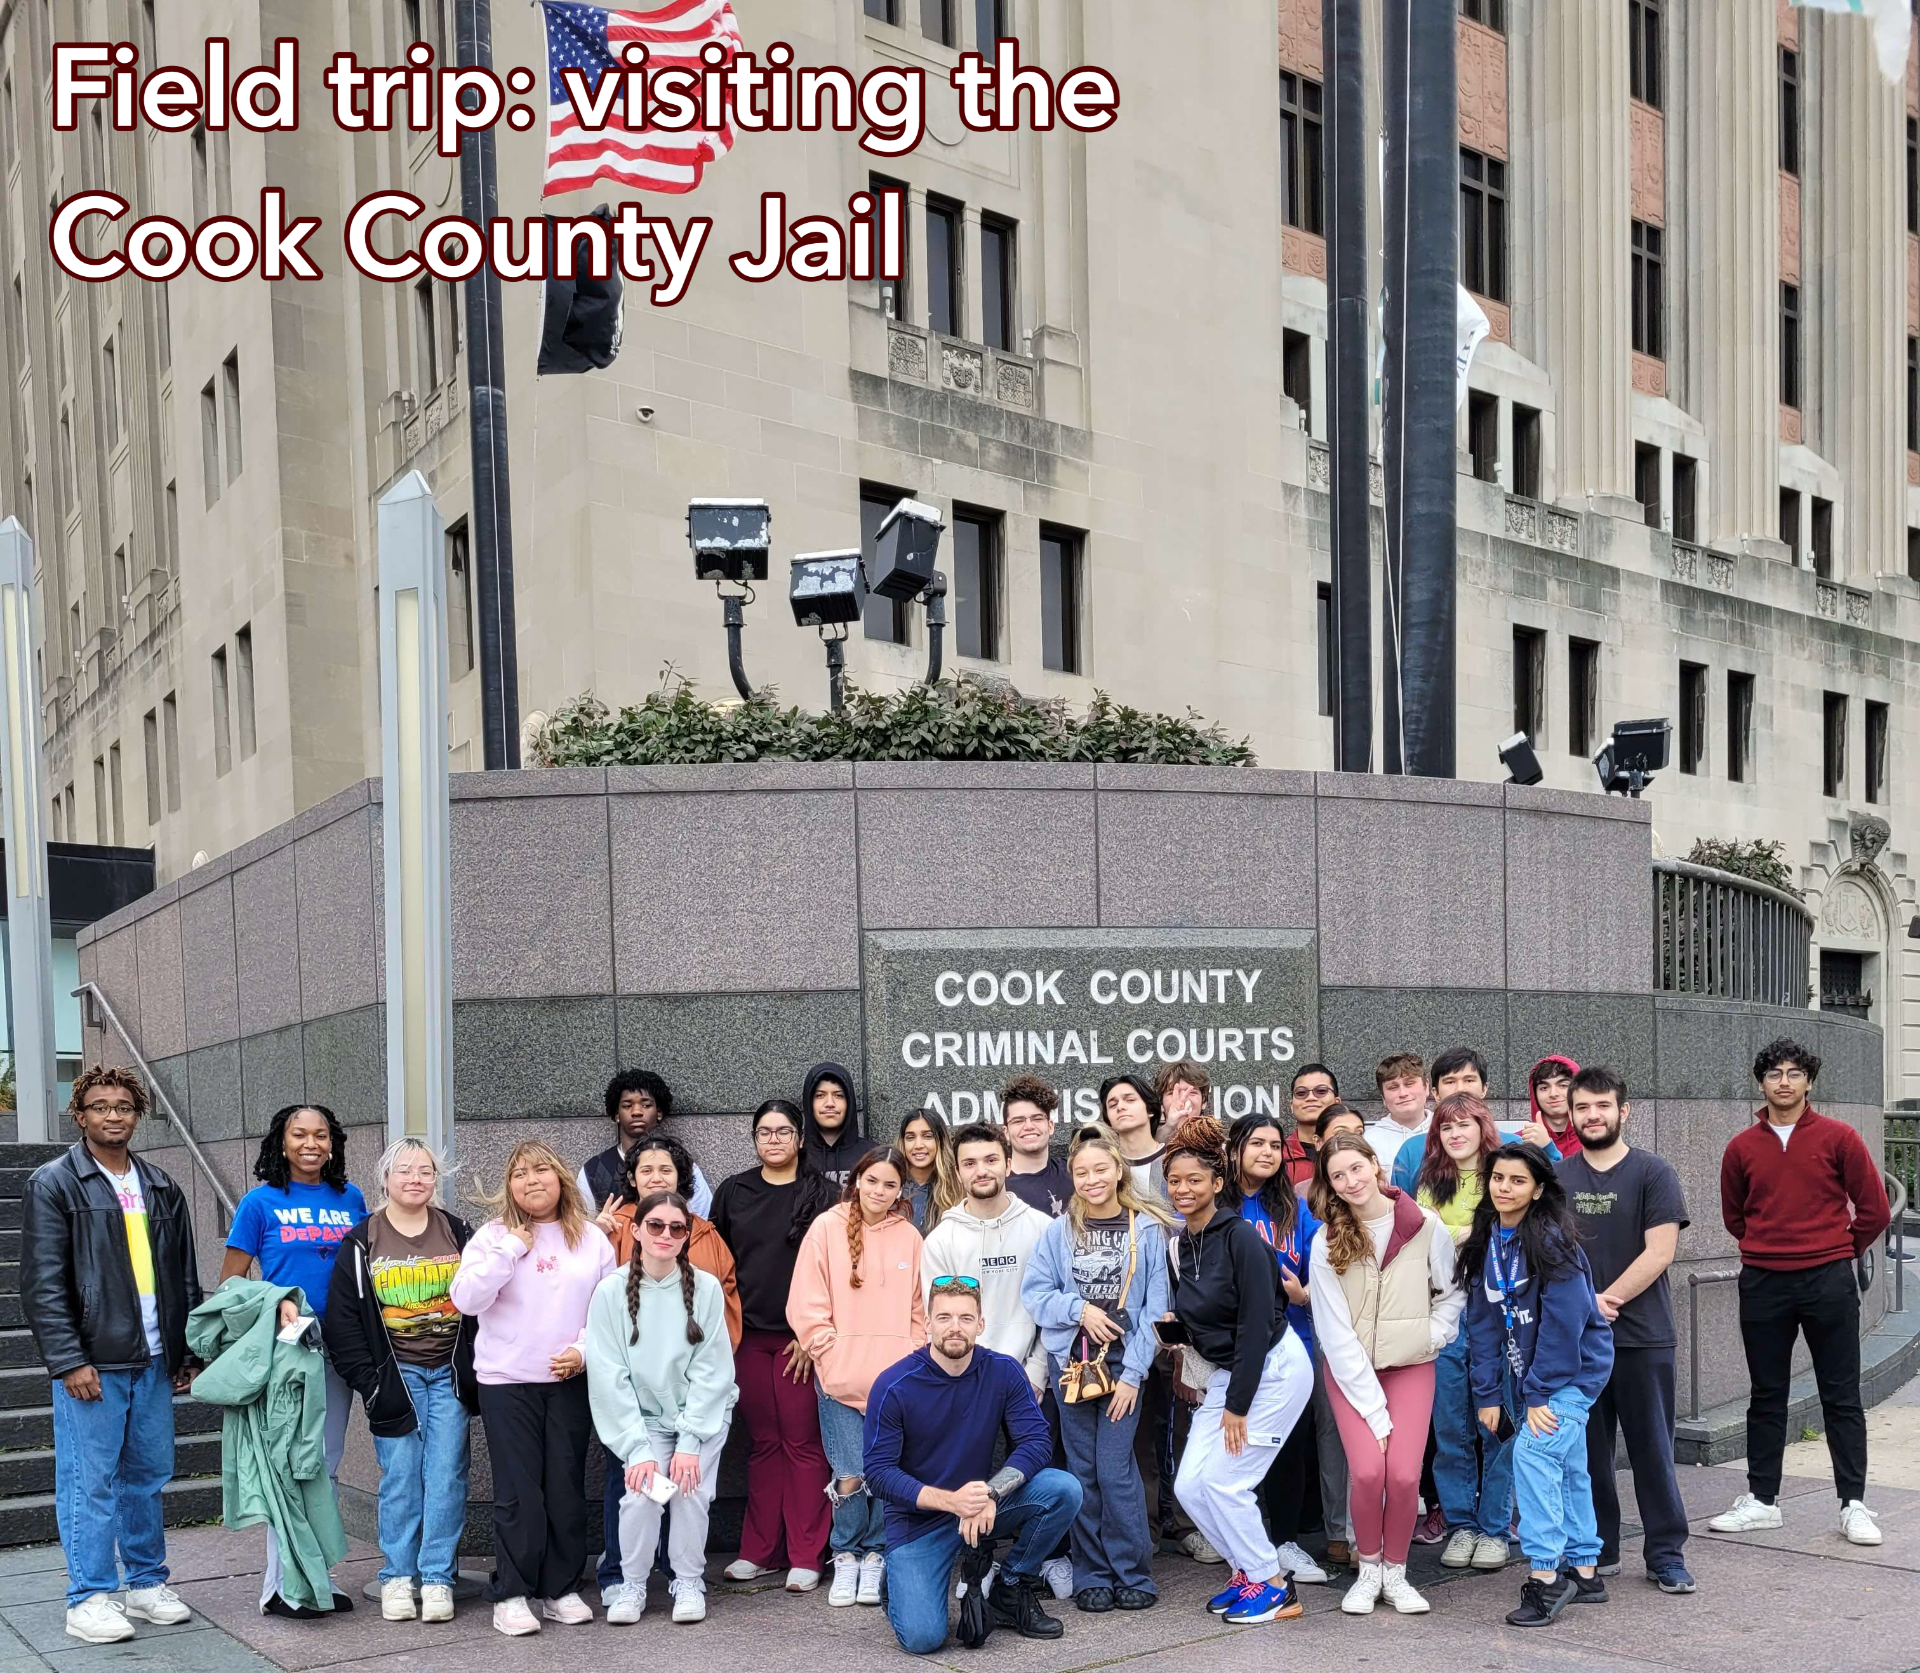 An image of a college class with the caption “Field trip: visiting the Cook County Jail”